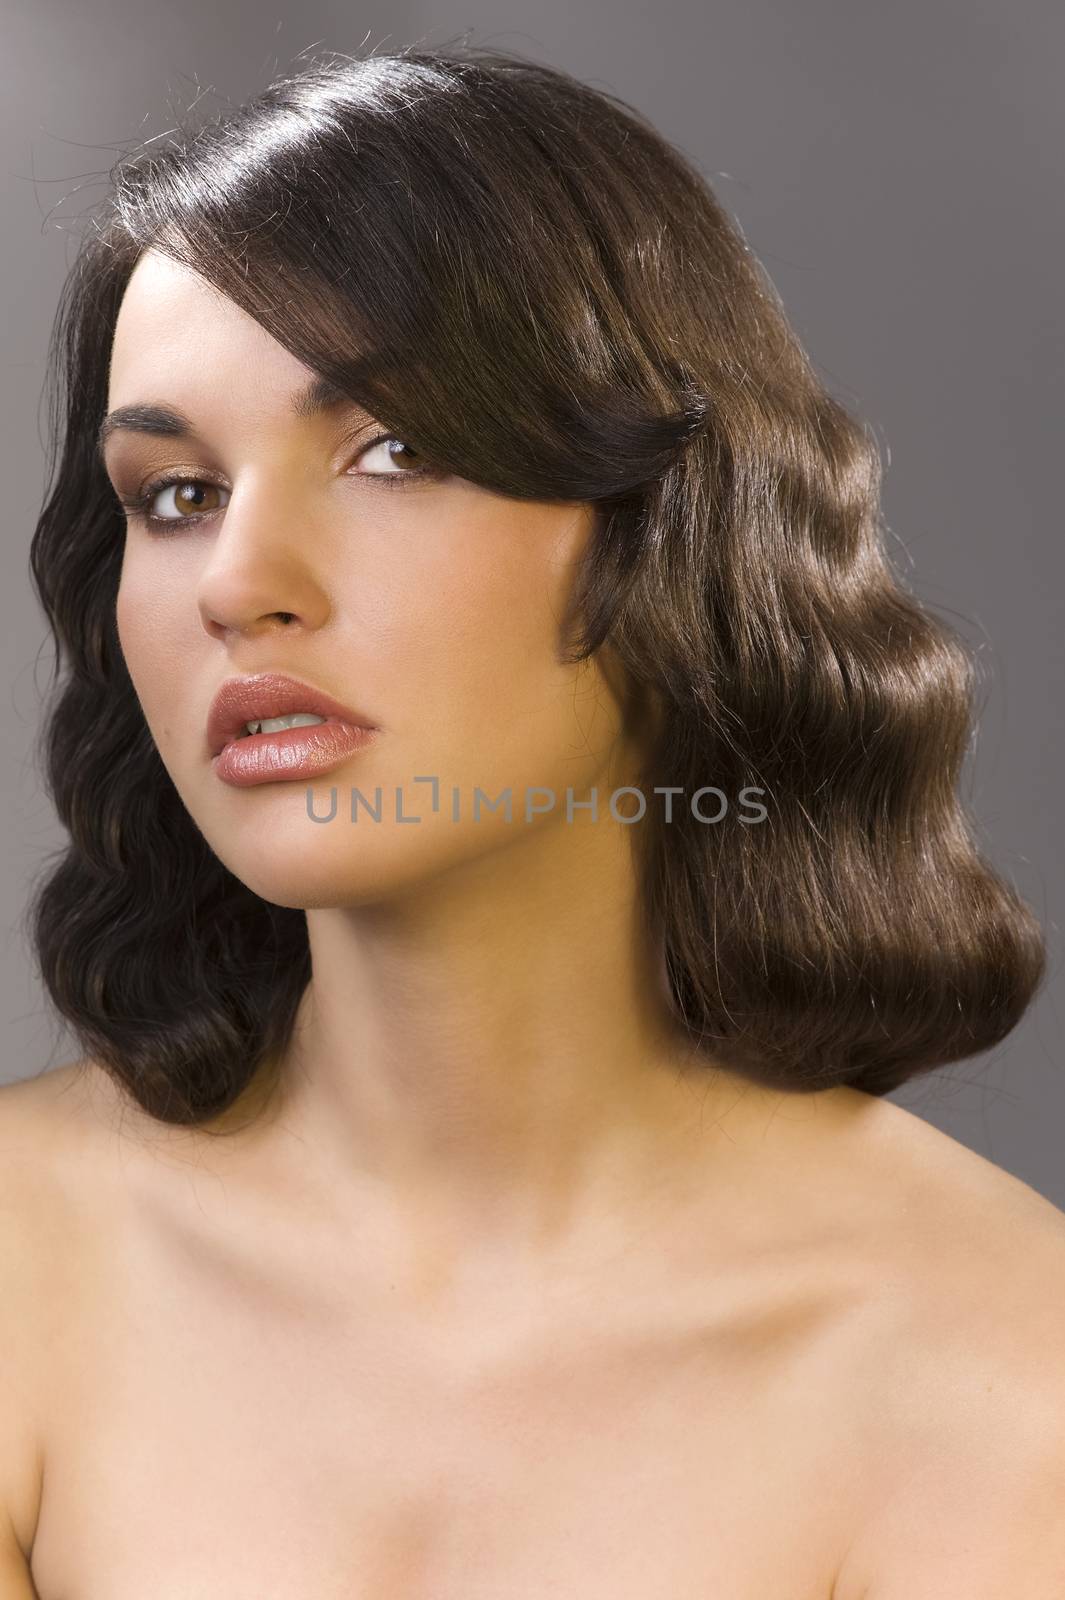 nice poertarit on dark background of beautiful brunette with an old fashion hair stylish